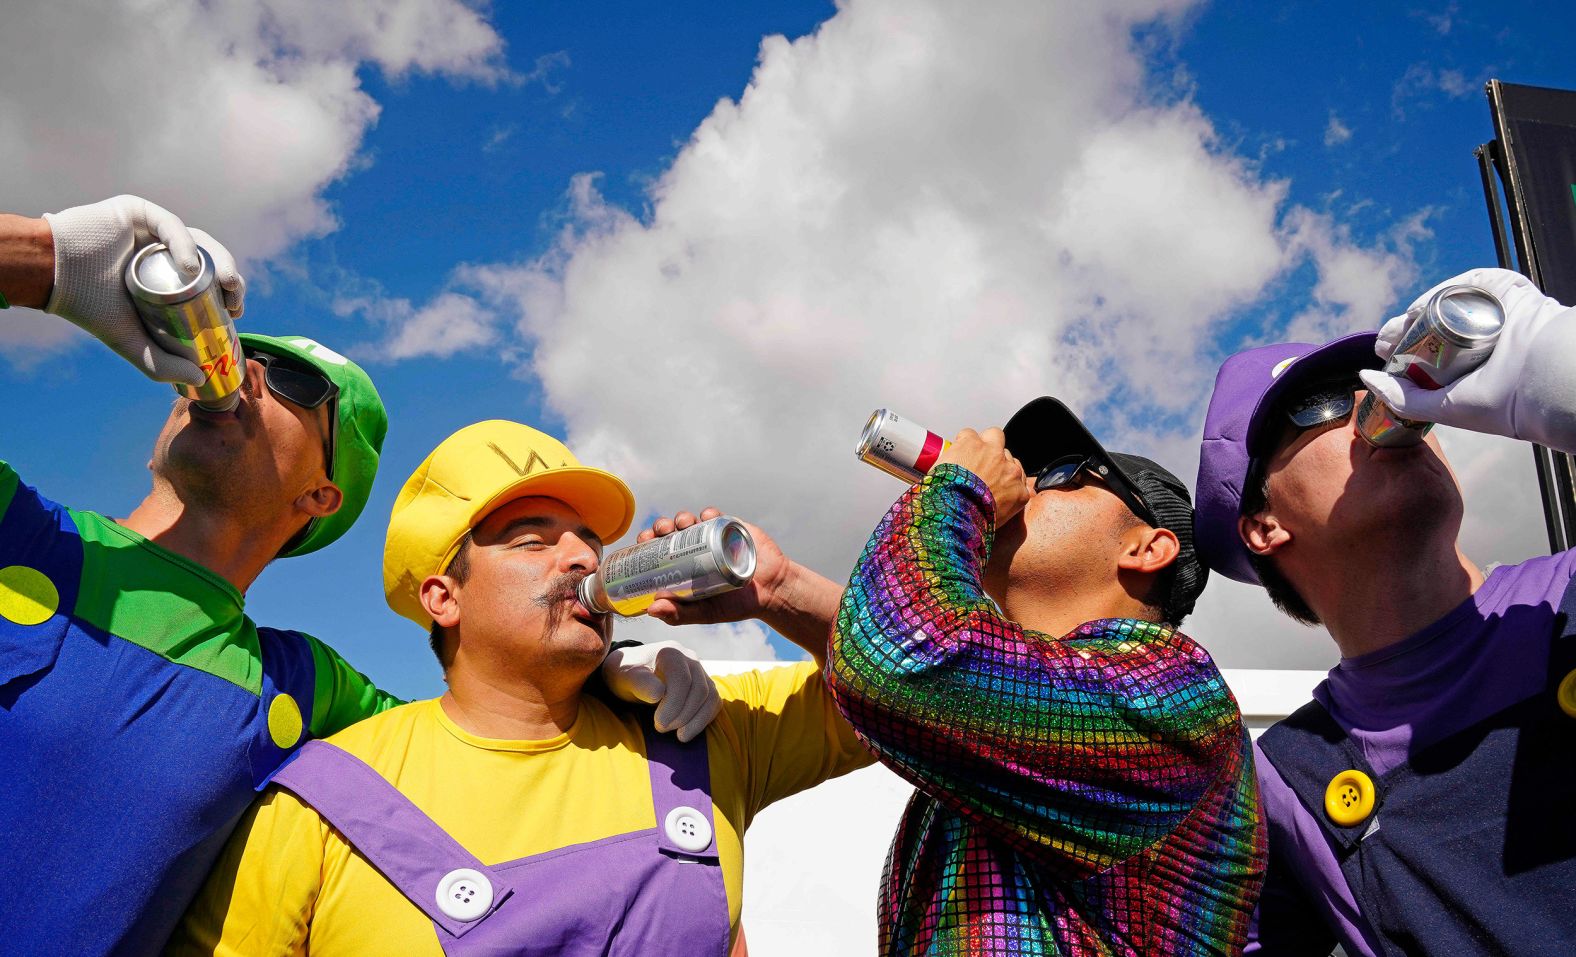 Costumed golf fans — from left, Grant Collinson, Cody Zavala, Juan Ruiz and Brett Beehler — drink beers while attending the <a href="index.php?page=&url=https%3A%2F%2Fwww.cnn.com%2F2024%2F02%2F12%2Fsport%2Fnick-taylor-phoenix-open-crowd-trouble-spt-intl%2Findex.html" target="_blank">WM Phoenix Open</a> on Saturday, February 10. The tournament is renowned for its raucous atmosphere, but there were <a href="index.php?page=&url=https%3A%2F%2Fwww.golfdigest.com%2Fstory%2Fphoenix-open-incidents-2024" target="_blank" target="_blank">various crowd-related incidents this week</a> that included arrests, fights and clashes between golfers and fans.